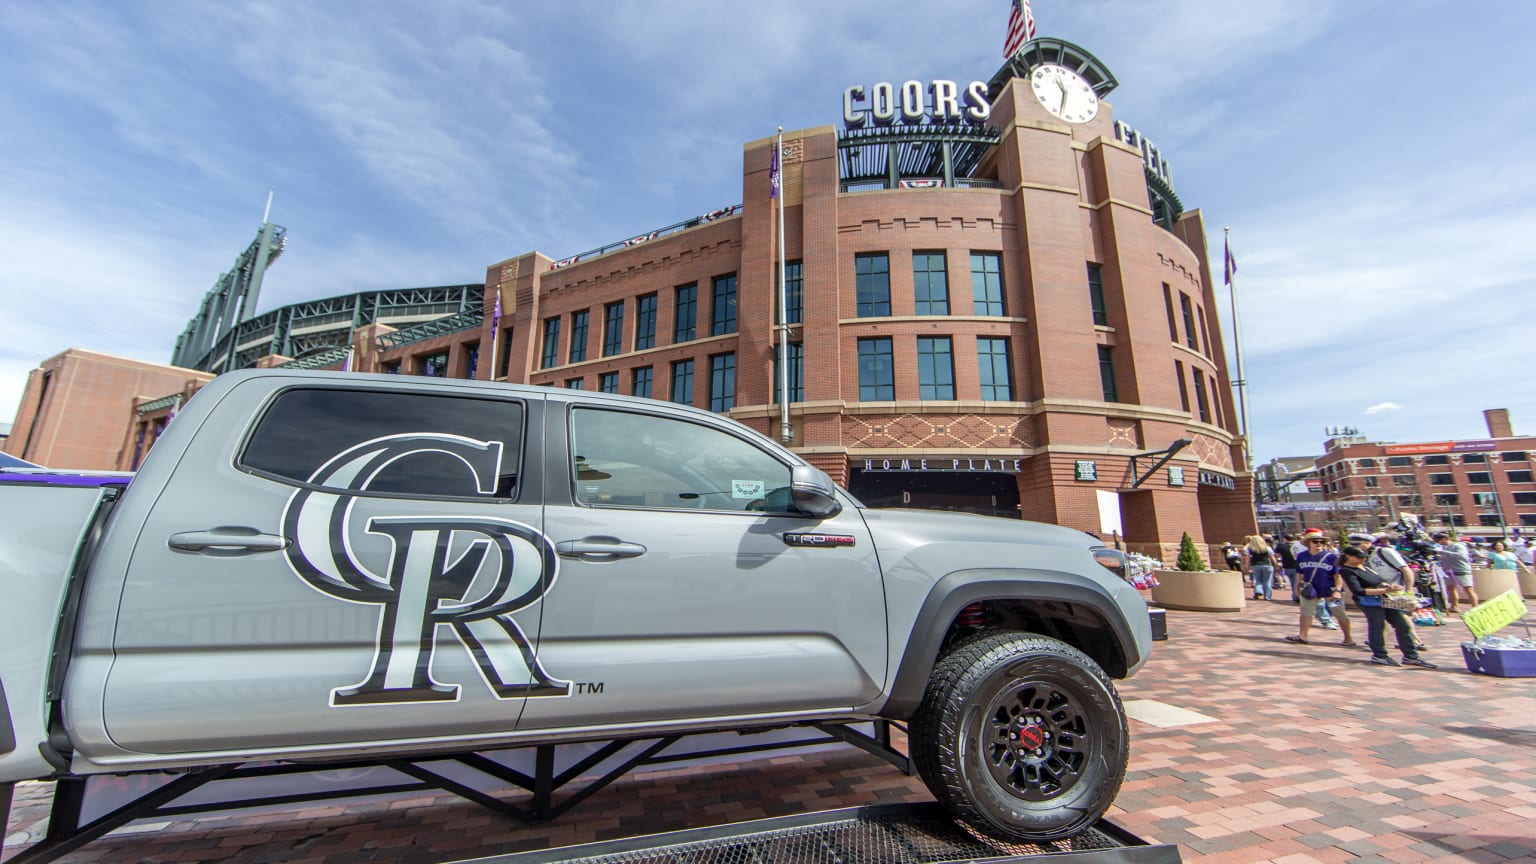 MLB All-Star Game's return to “fully packed” Coors Field an